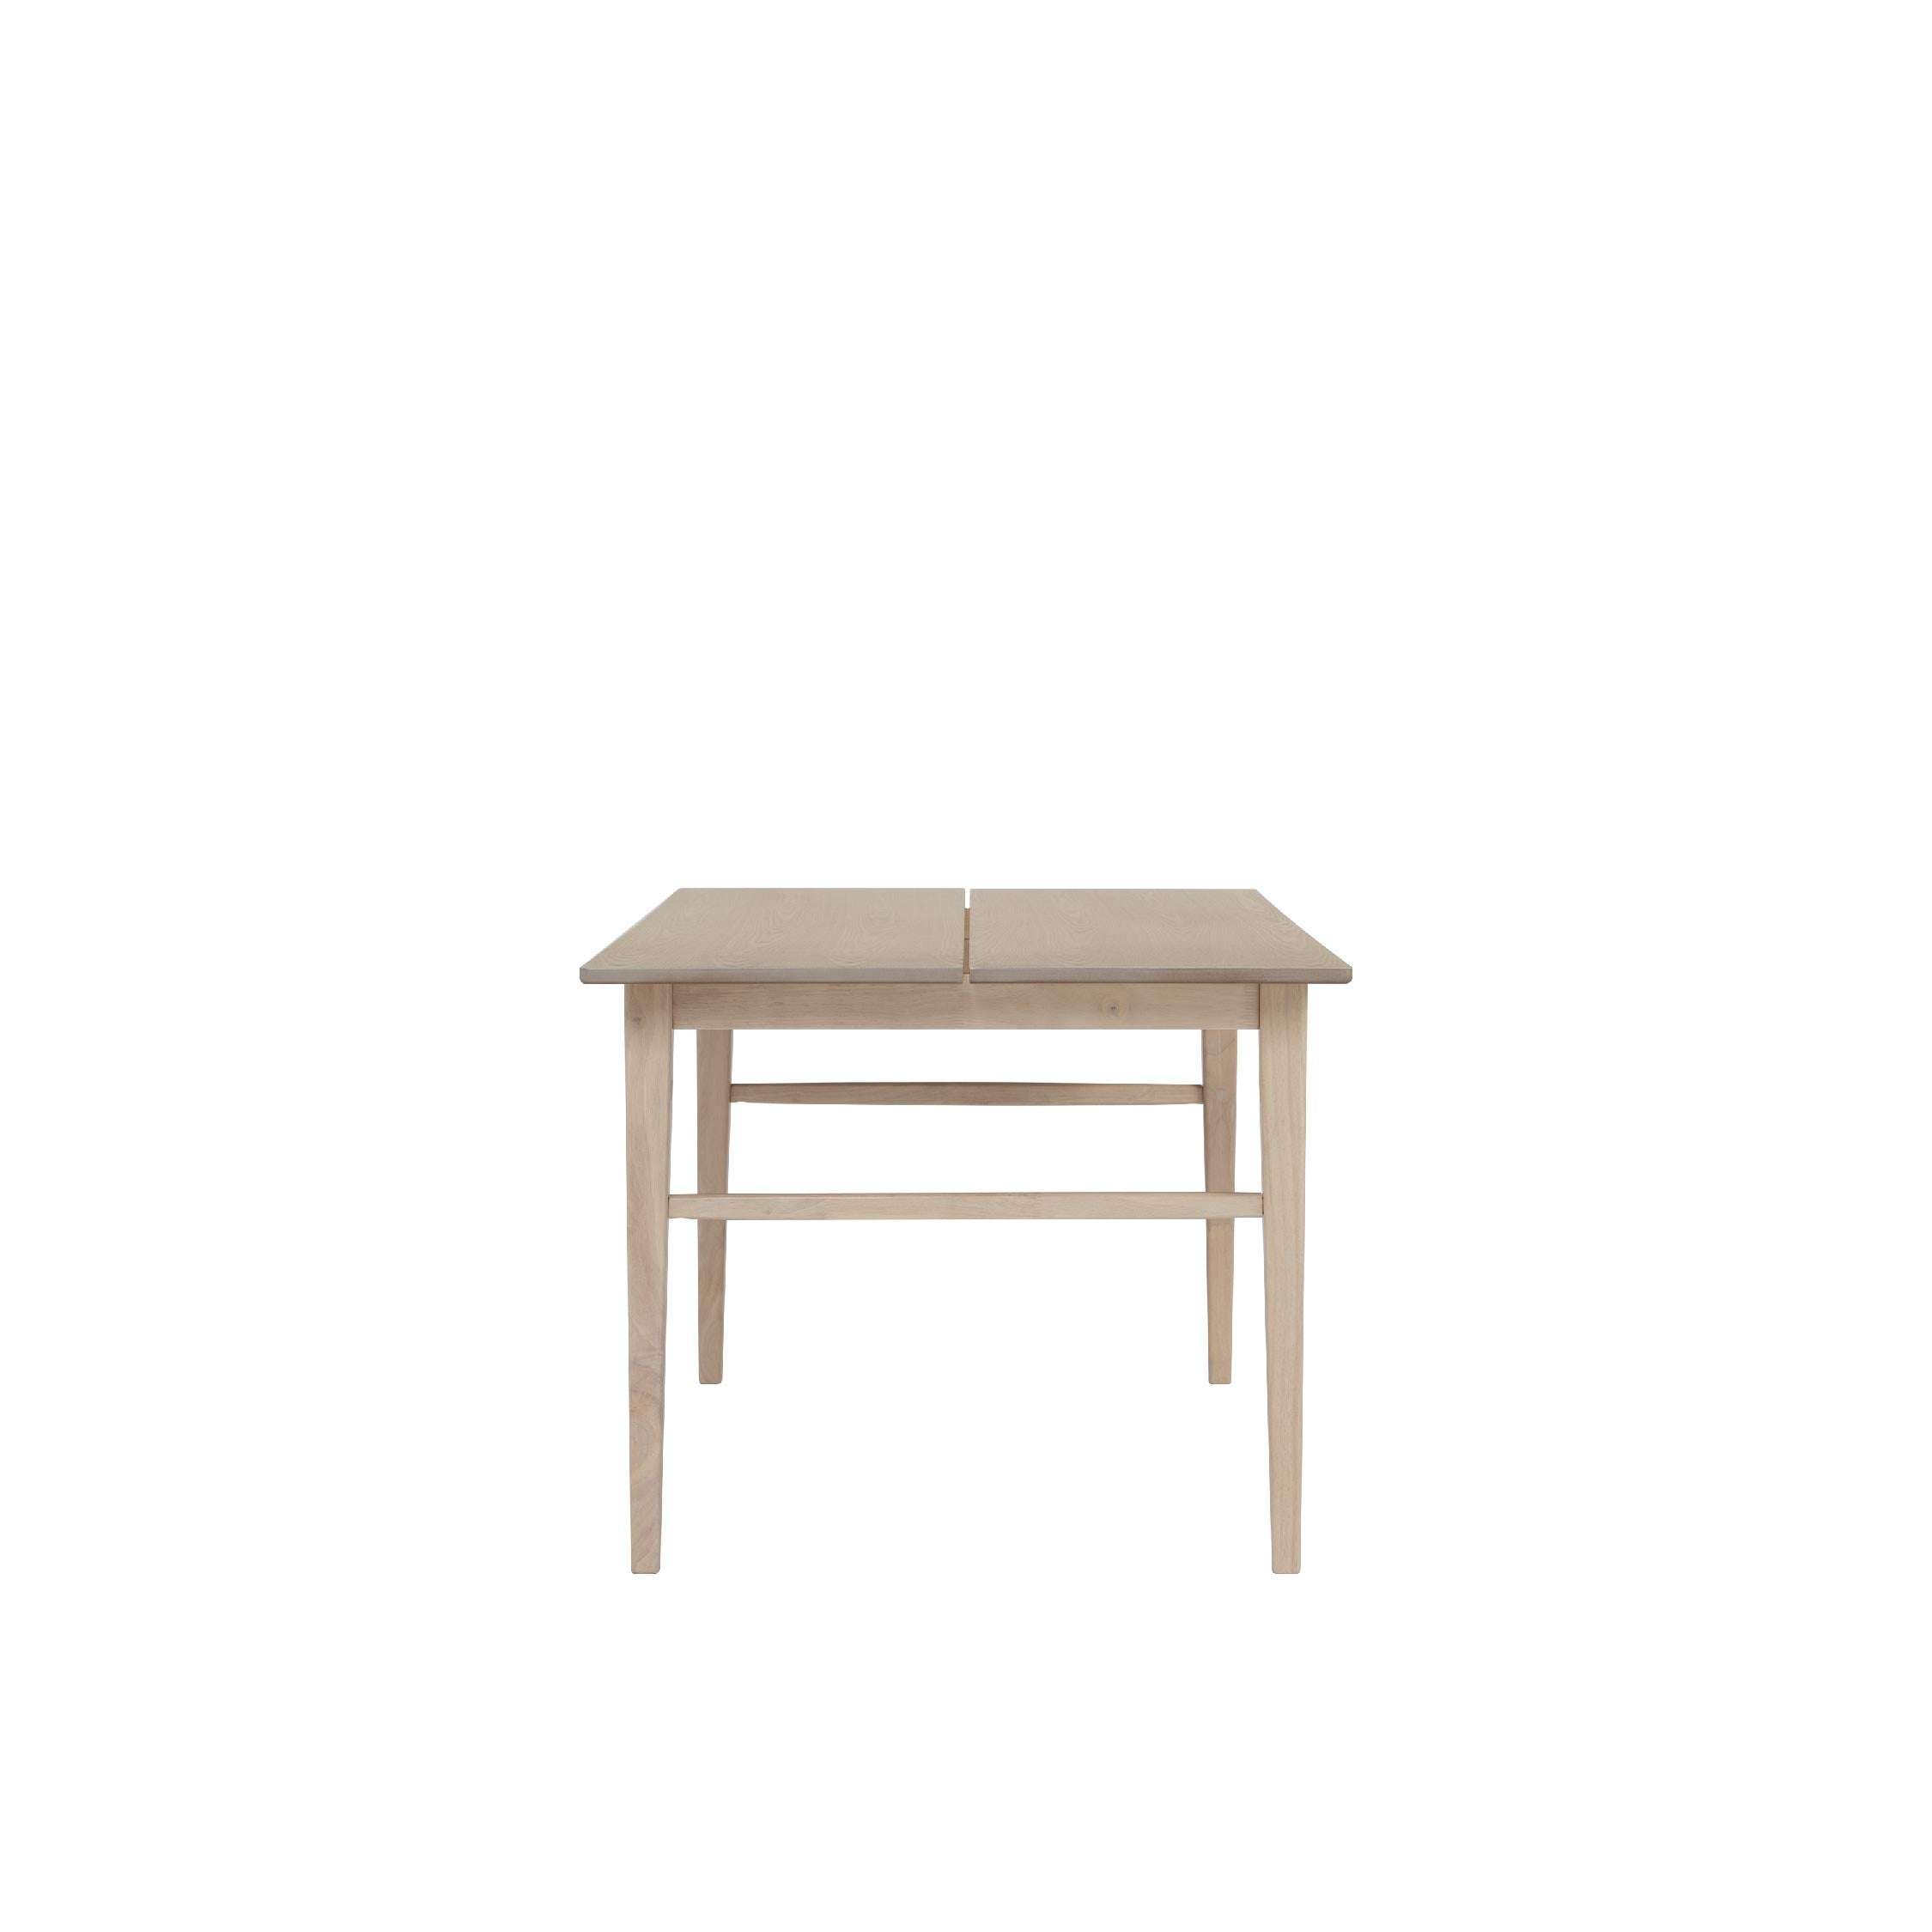 SOLID Dining Table II 1.8m